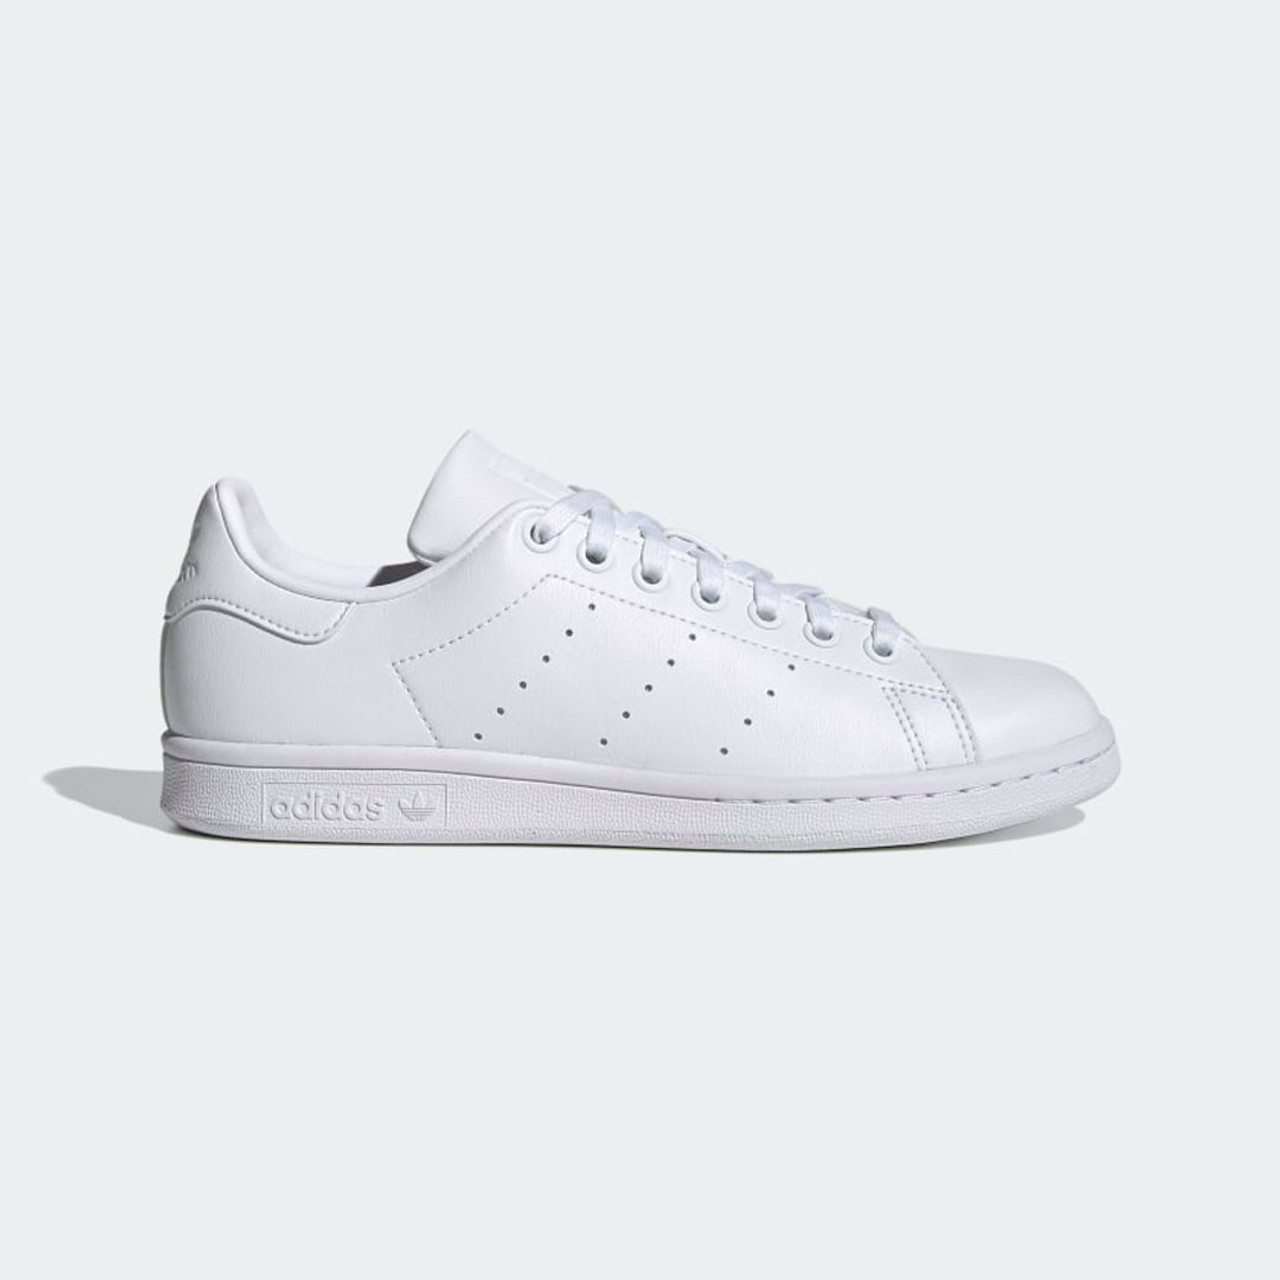 What to wear with white Stan Smiths?